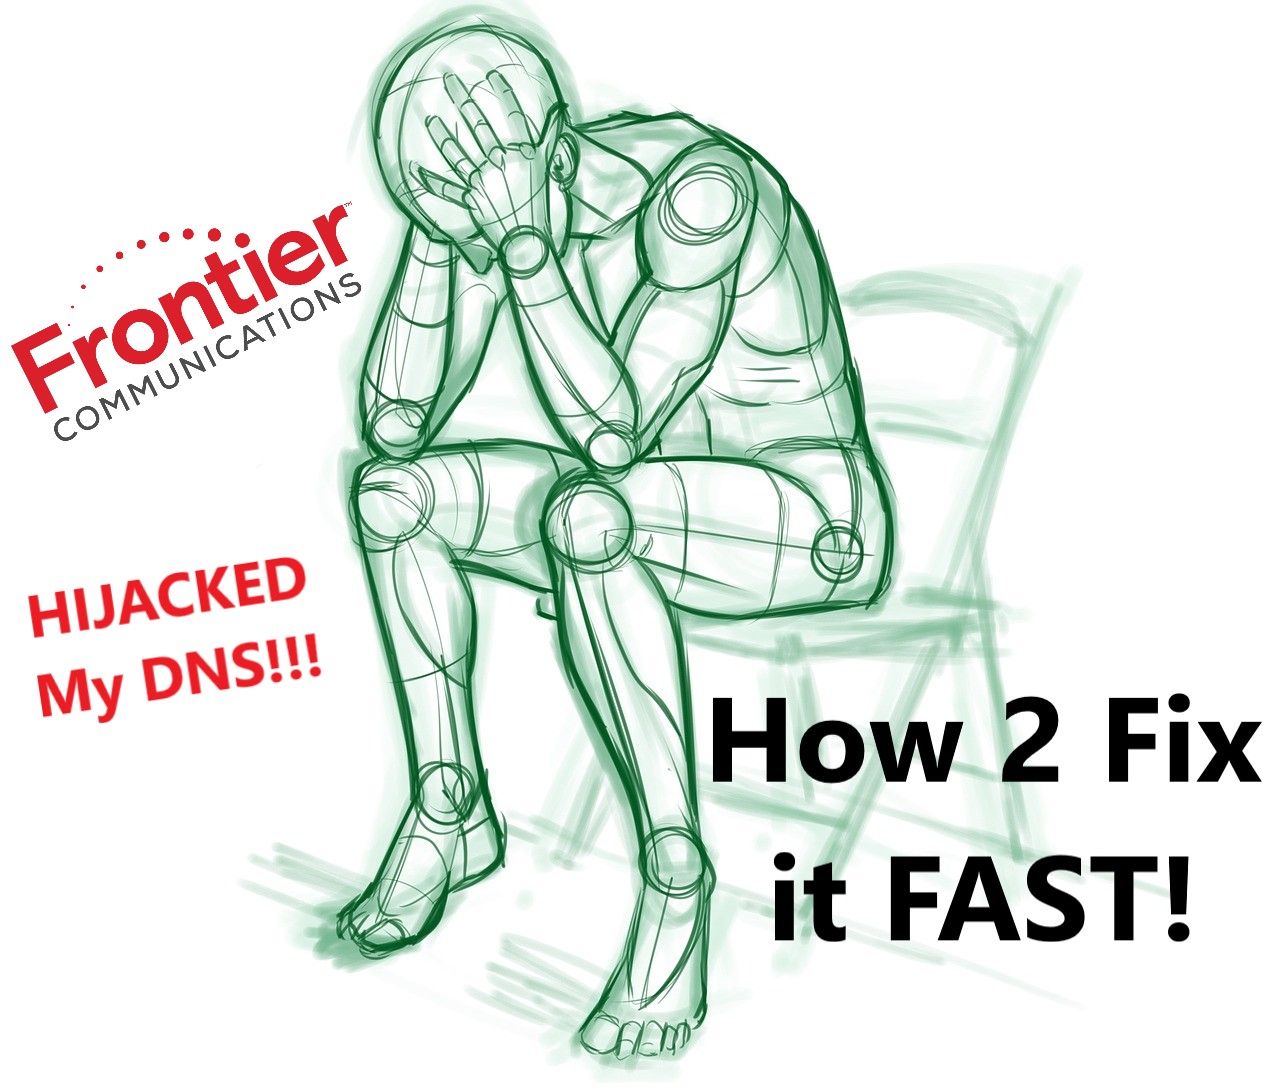 How do I prevent Frontier from hijacking my DNS requests?